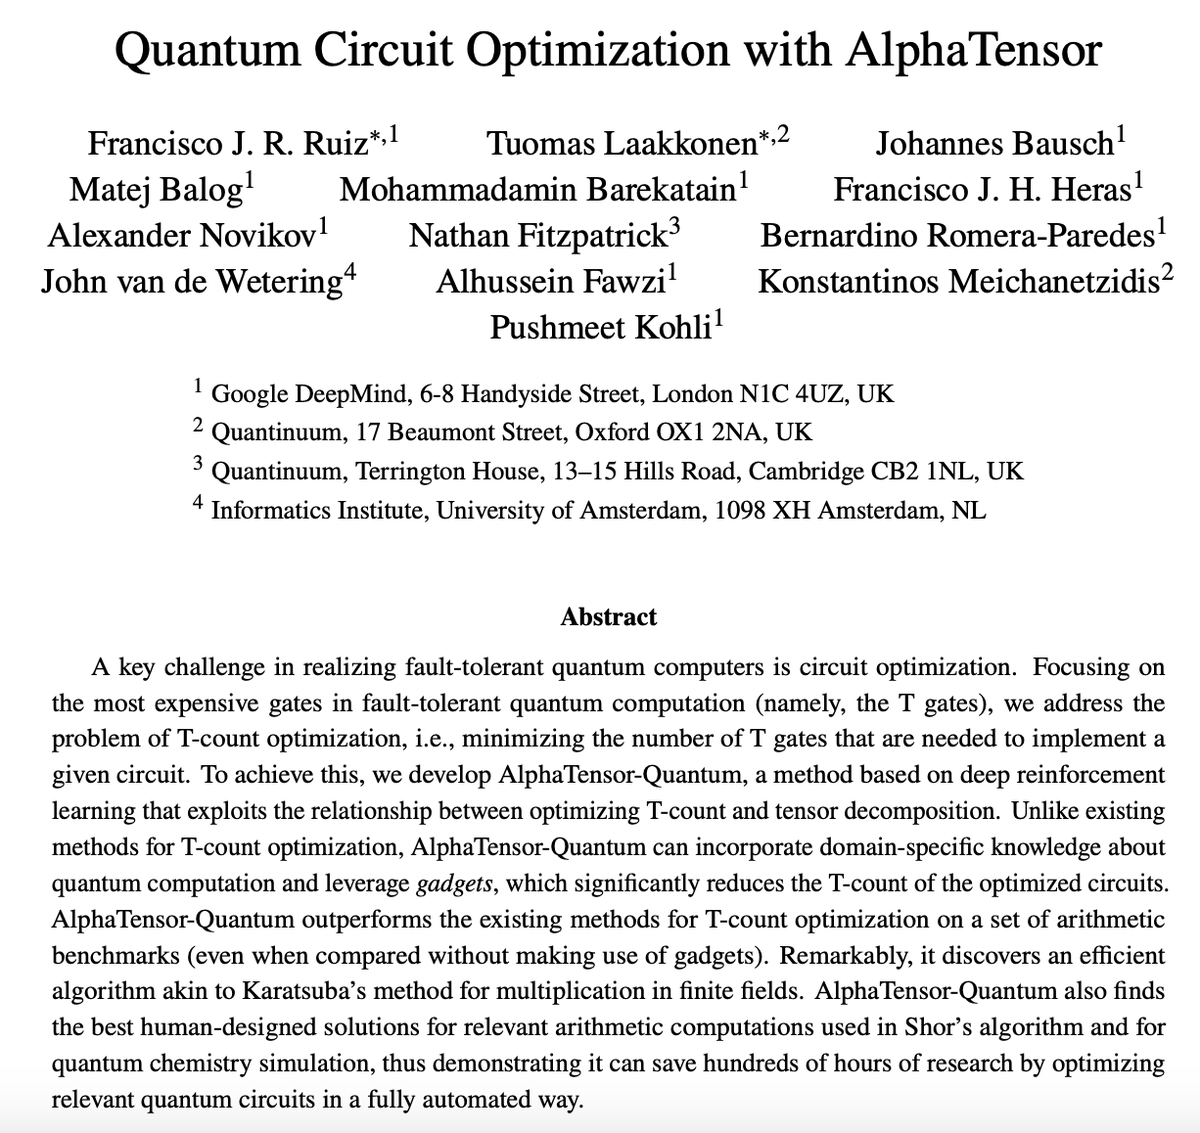 Today in QEC on the arXiv arxiv.org/abs/2402.14396 With fault-tolerant quantum computers we'll have easy access to Clifford gates. Non-Cliffords, like T gates, will take more effort. Here they present an AI powered new way to minimize the number of T gates needed for a circuit